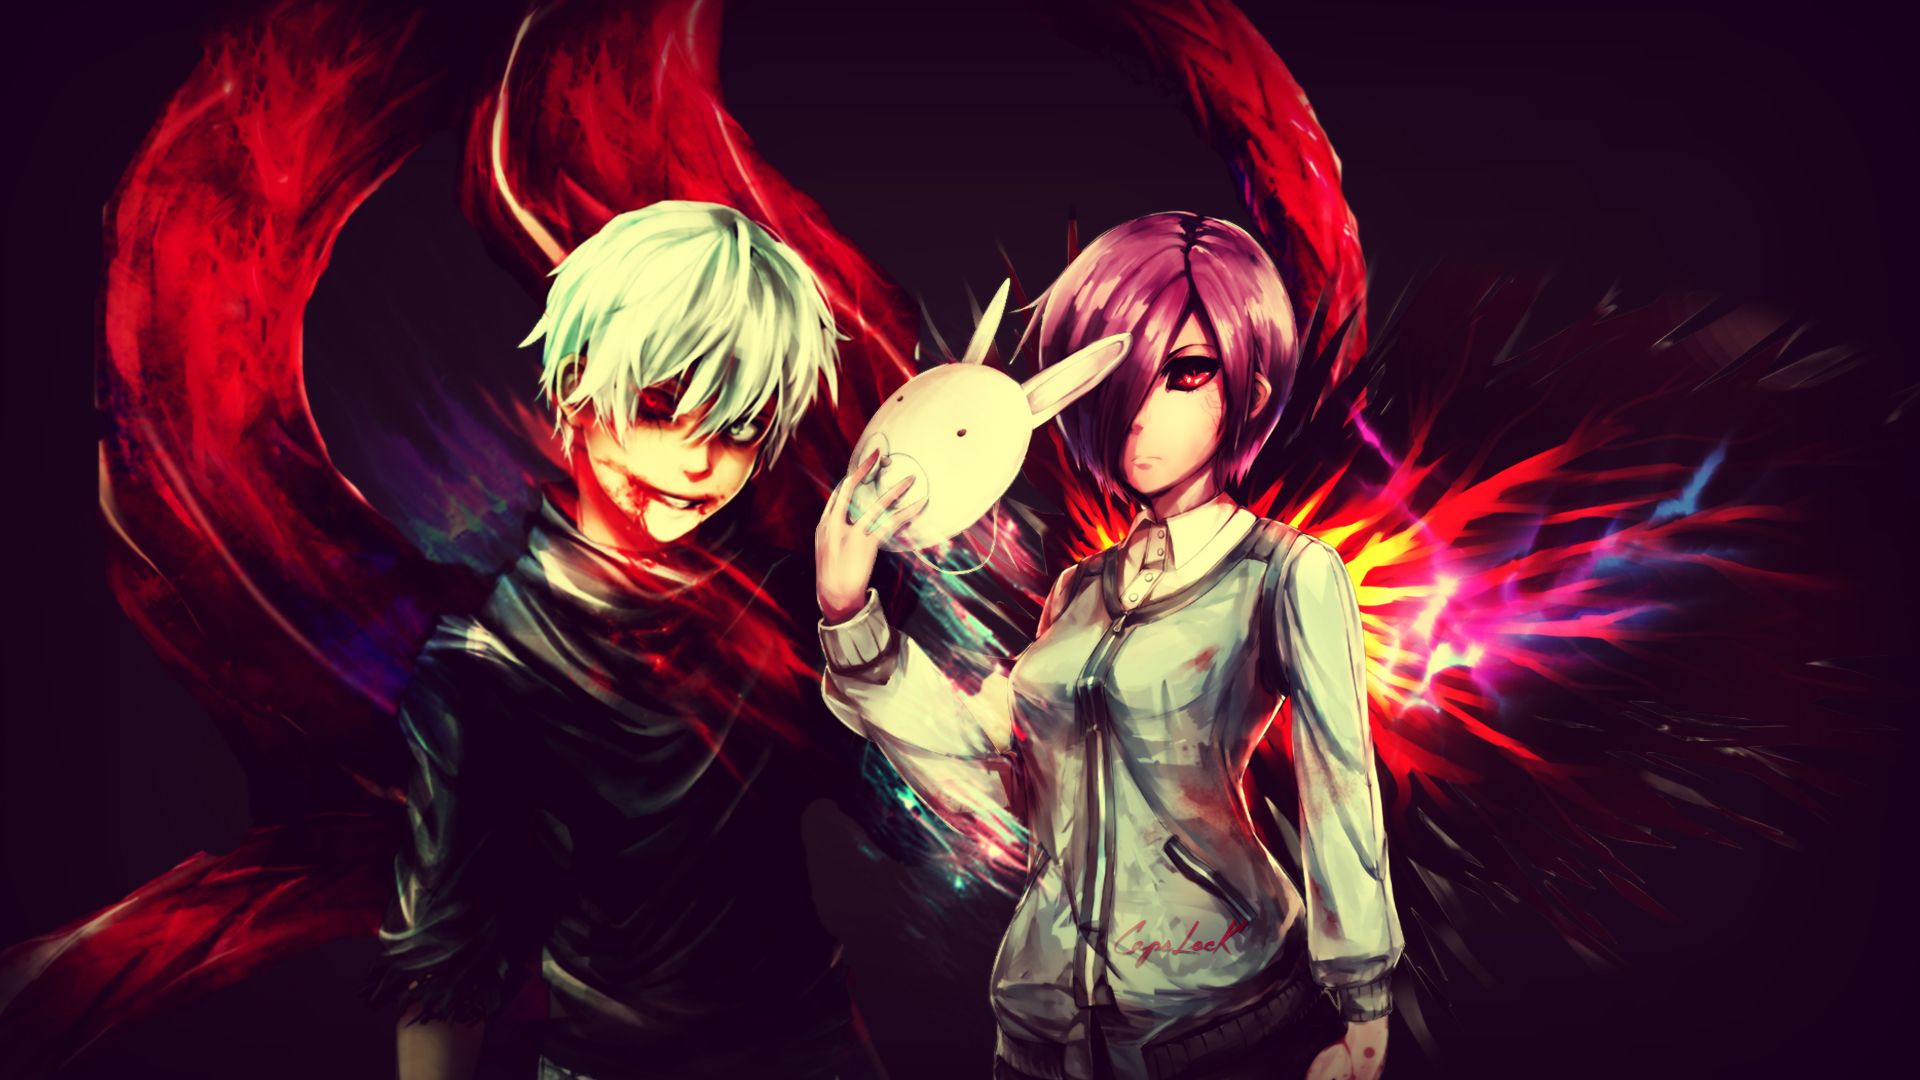 Download wallpaper from anime Tokyo Ghoul with tags: Linux, Ken